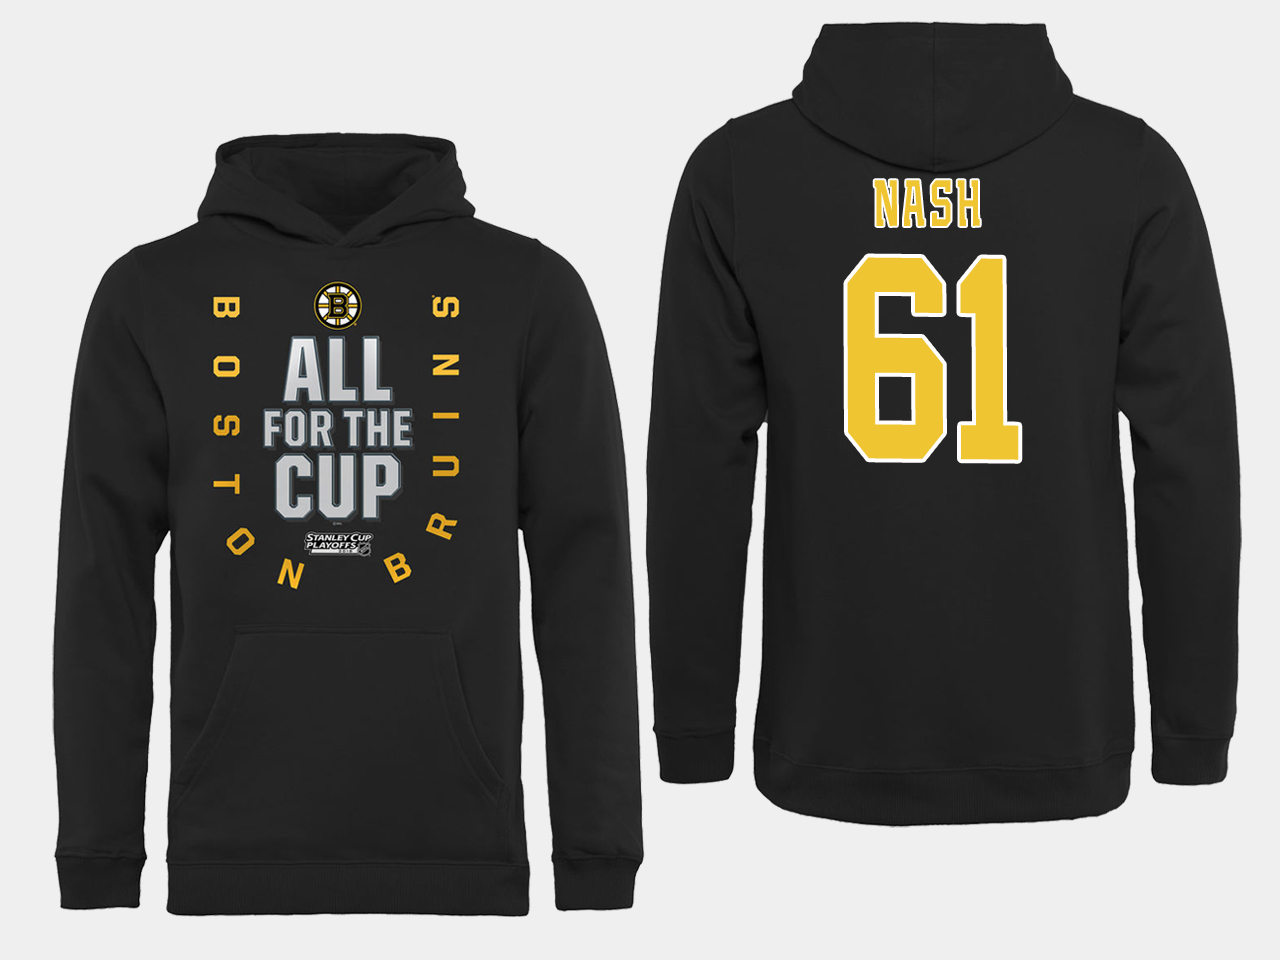 NHL Men Boston Bruins #61 Nash Black All for the Cup Hoodie->boston bruins->NHL Jersey